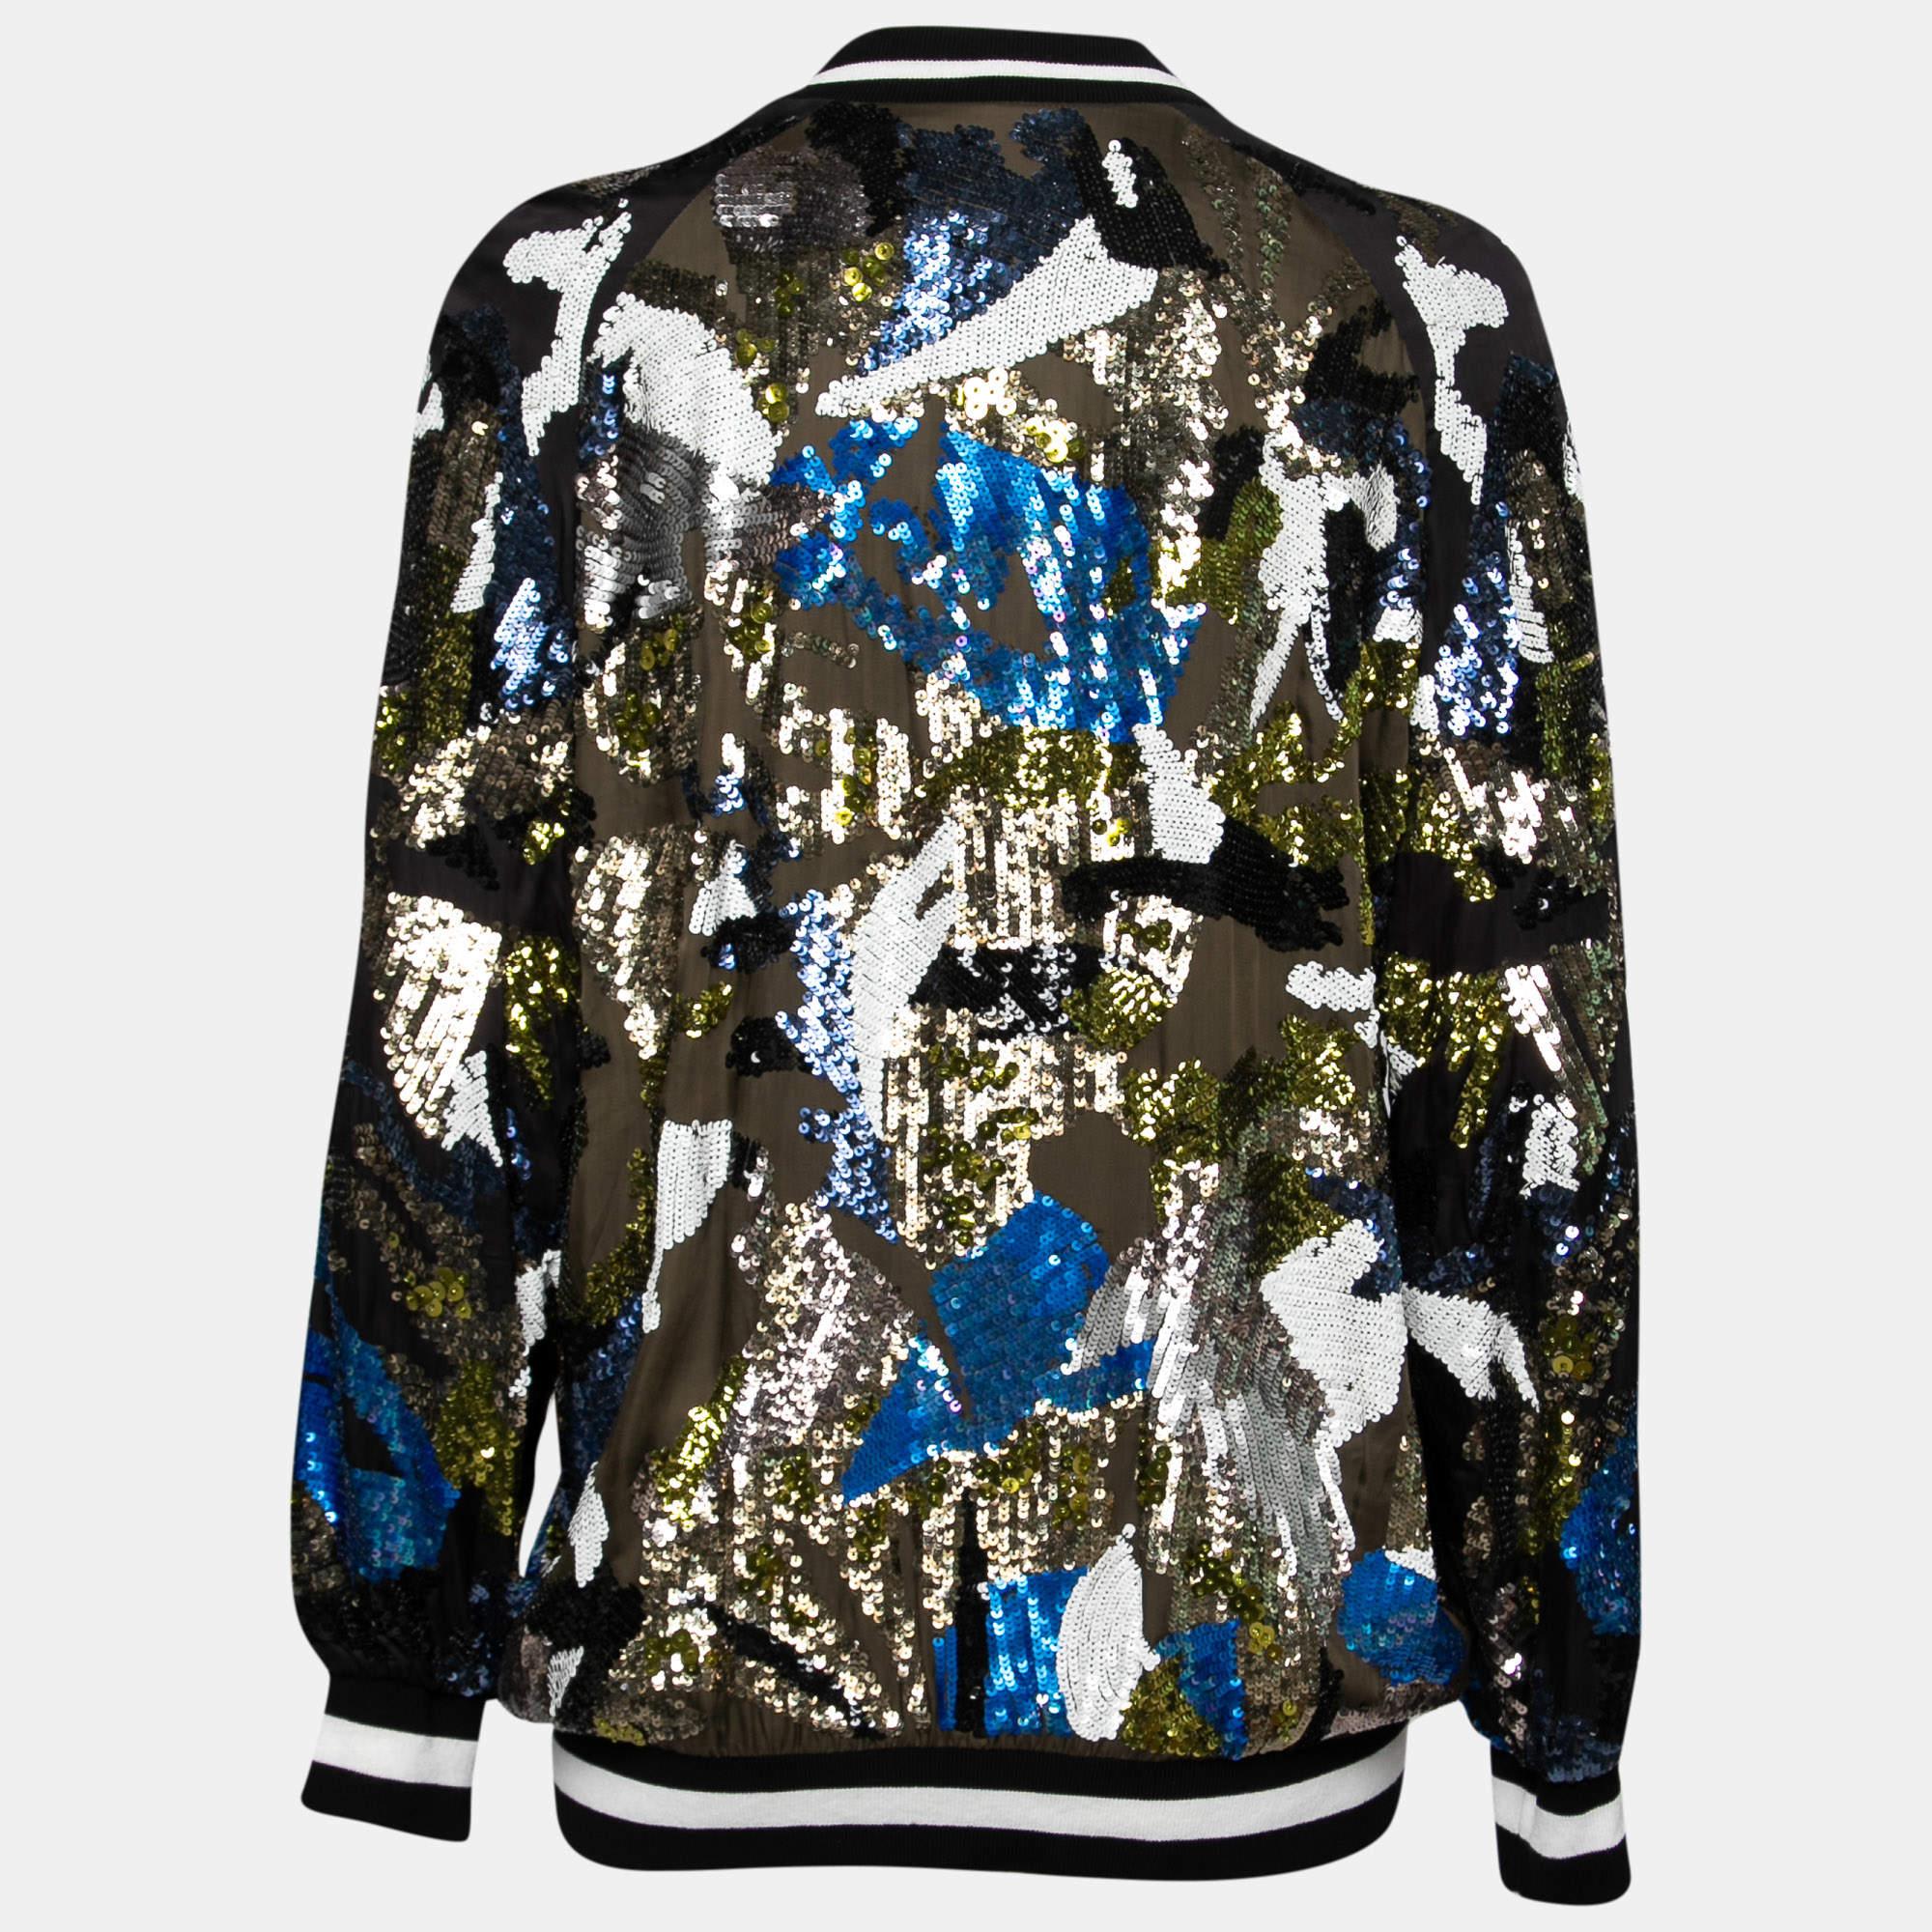 This bomber jacket is from the house of Amen. Crafted into a sequin-embellished design, this bomber jacket can be layered over your party outfits to set a stylish fashion statement that makes you the centre of attention wherever you go.

Includes: 